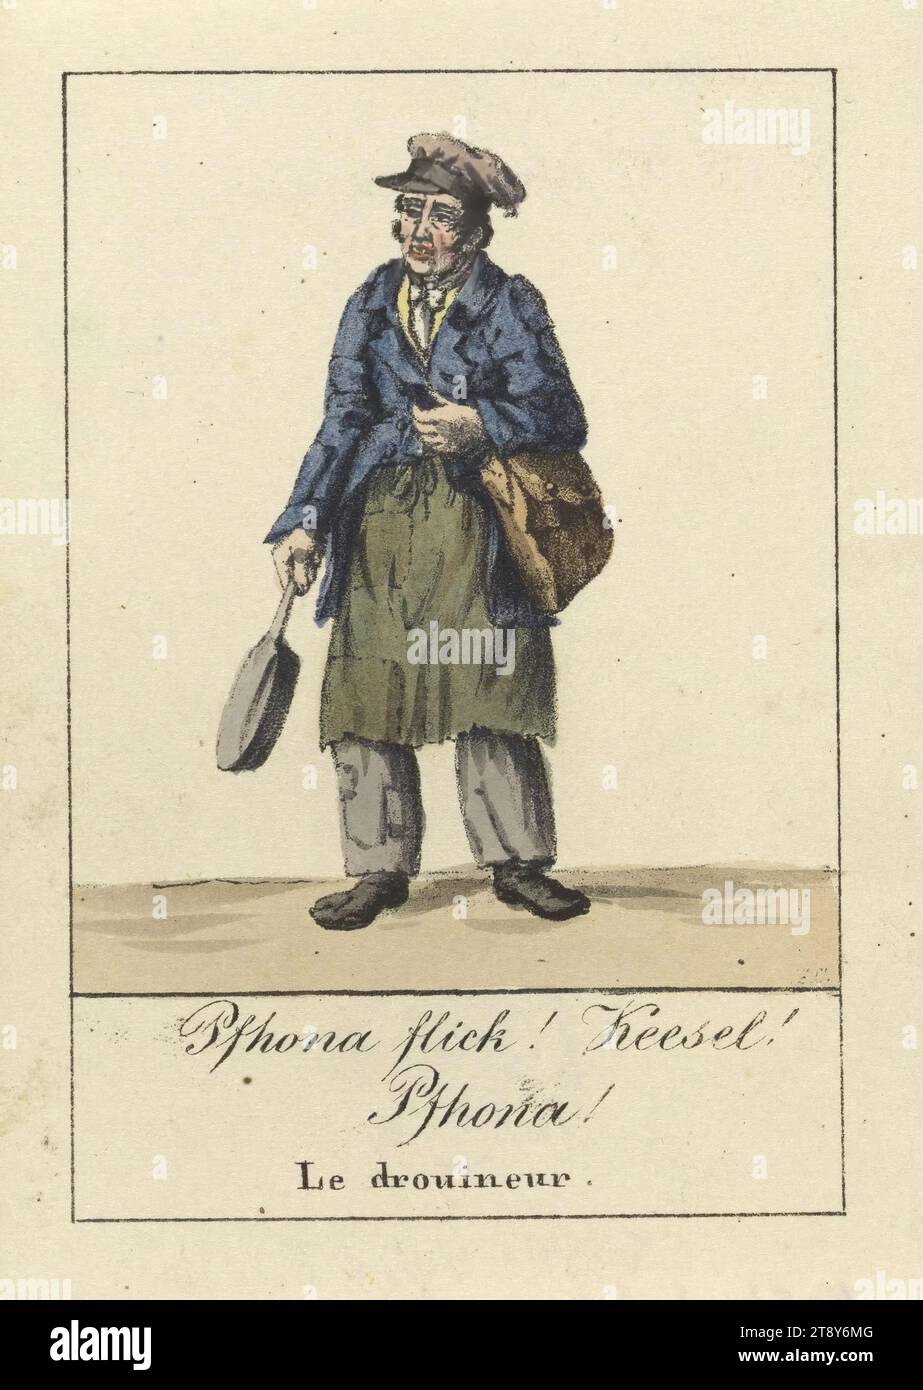 Viennese exclamations: 'Pfhona flick! Keesel! Pfhona!, Le drouineur.' [Pfannenflicker], Ferdinand Cosandier († 1845), Artist, Josef Bermann (1810-1886), publisher, Date around 1820, paper, colorised, lithography, height 11, 3 cm, width 7, 8 cm, Job Depictions, Craftmanship, Stereotypes, man, kitchen-utensils: pan, The Vienna Collection Stock Photo